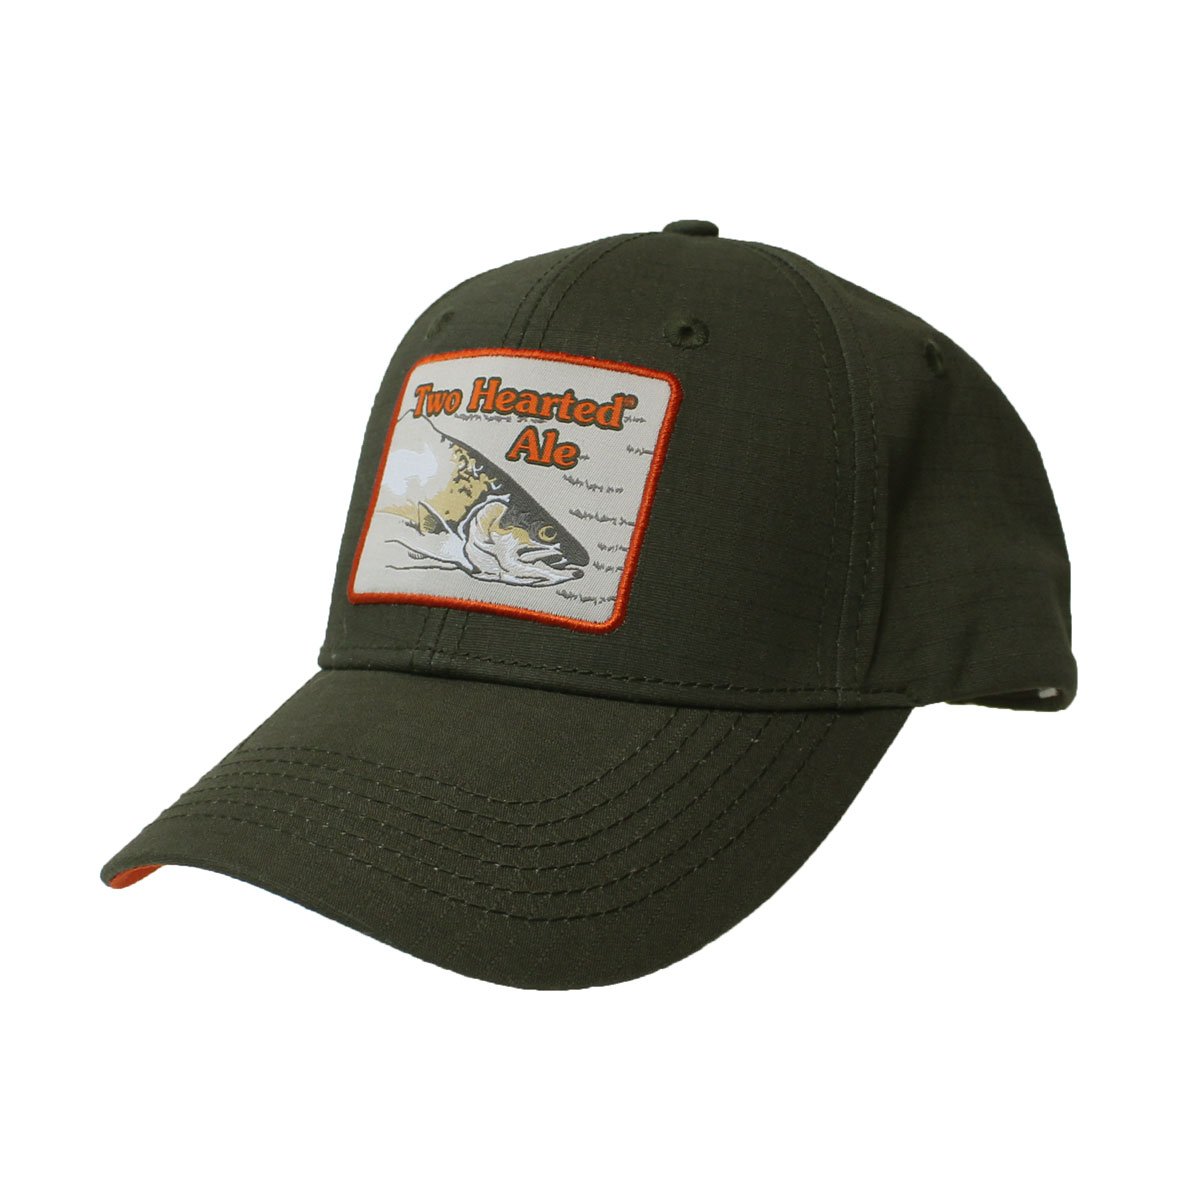 Two Hearted Ale Cotton Ripstop Hat